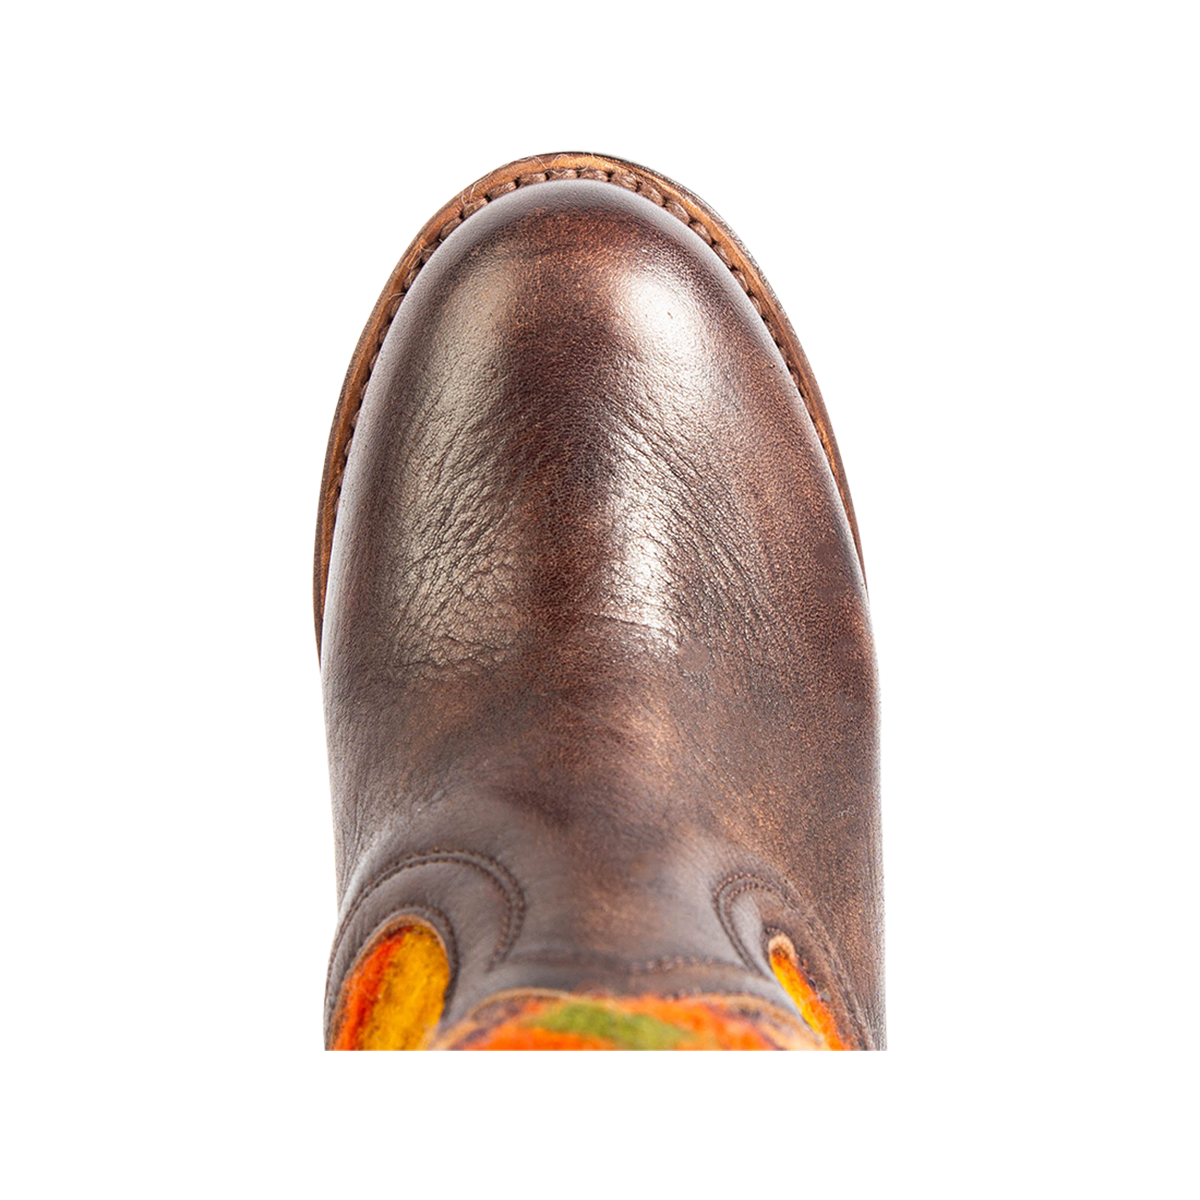 Top view showing a rounded toe and Goodyear welt on FREEBIRD women's Songbird brown leather bootie